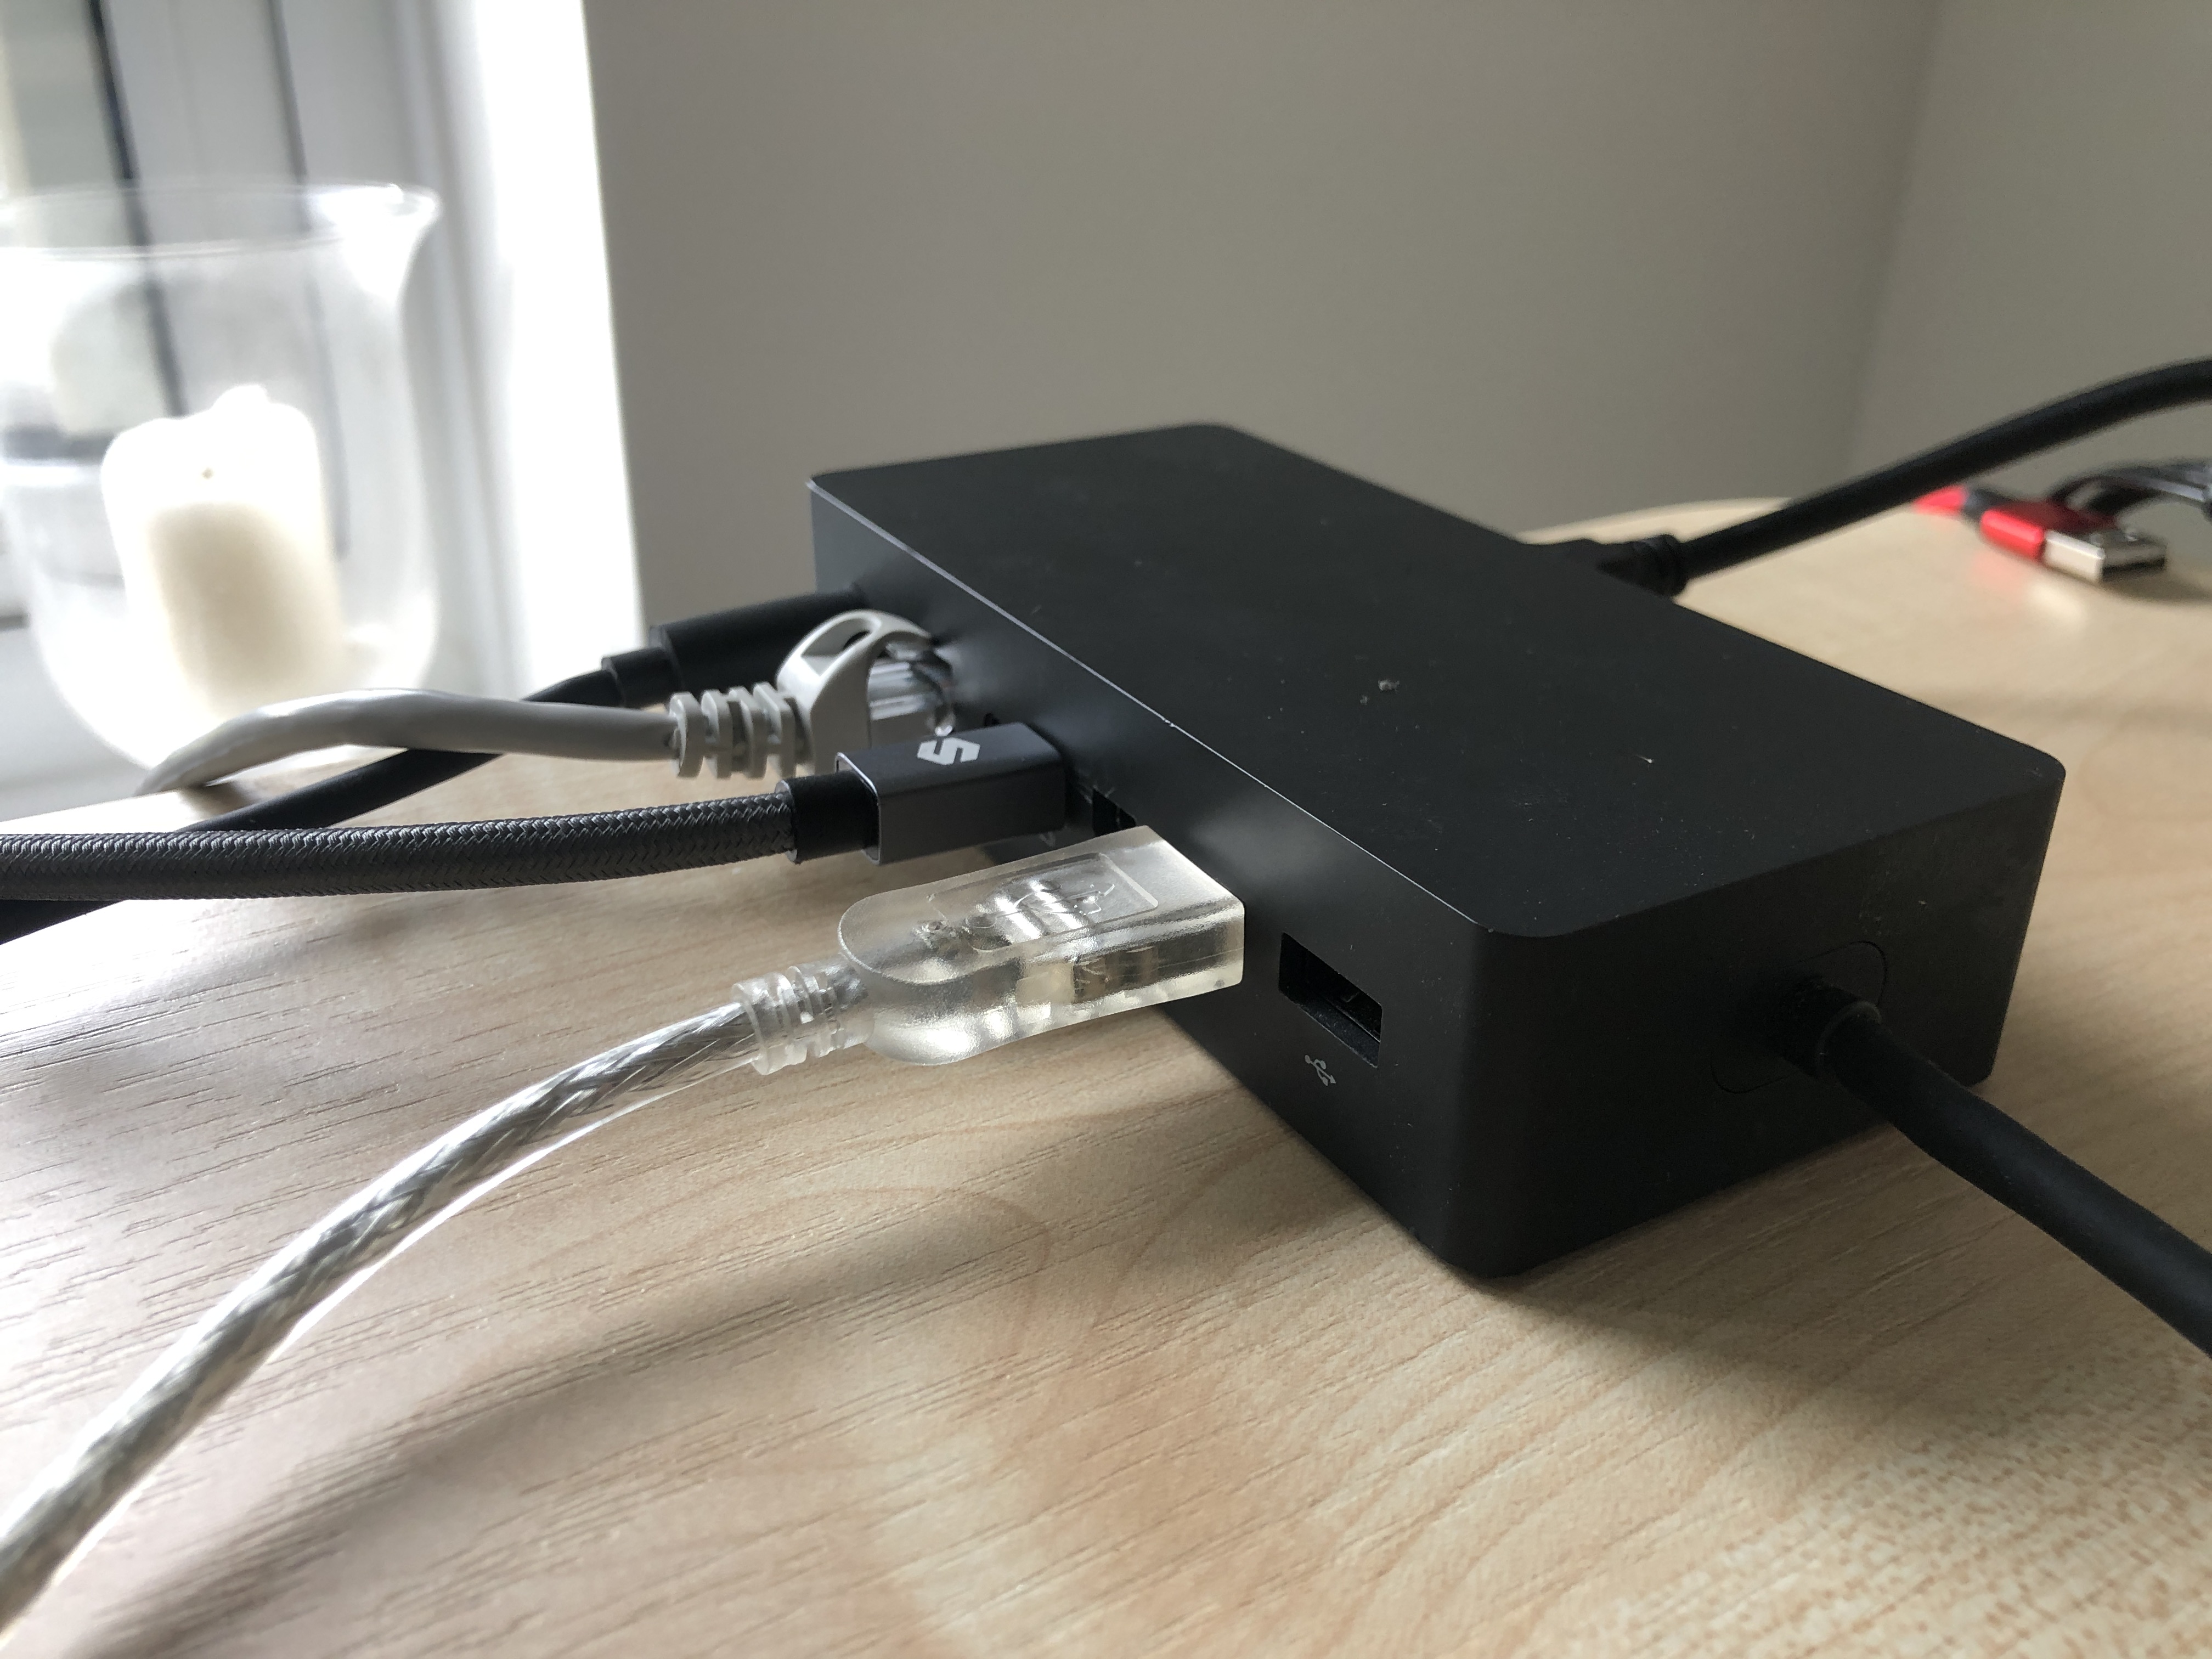 New style Surface dock on a desk, with cables plugged into it